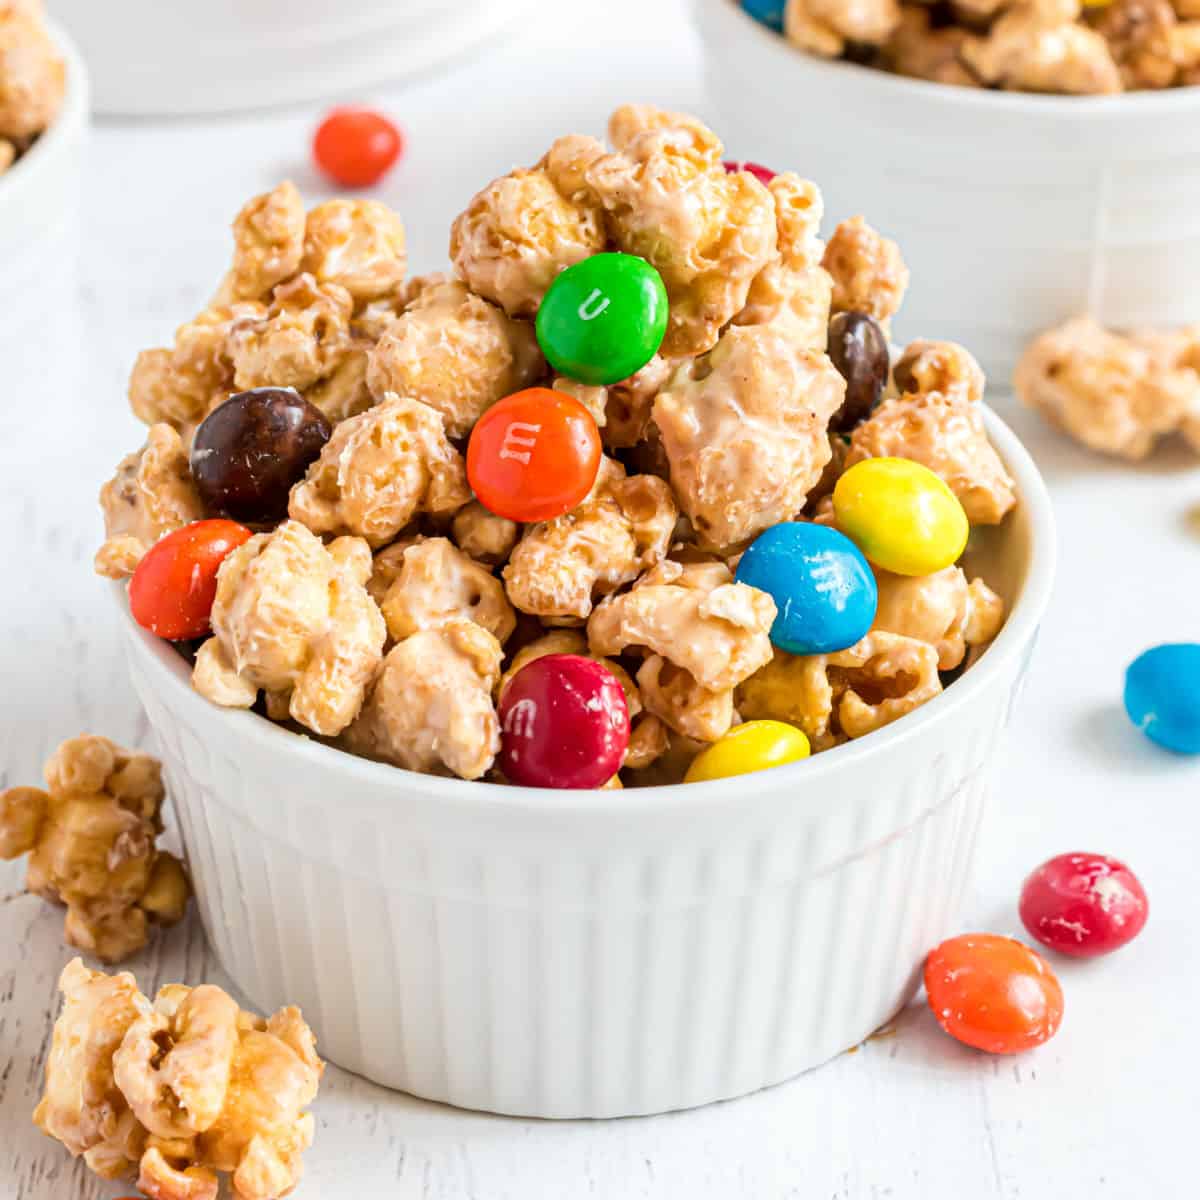 Nutrition & Ingredients for Caramel M&Ms